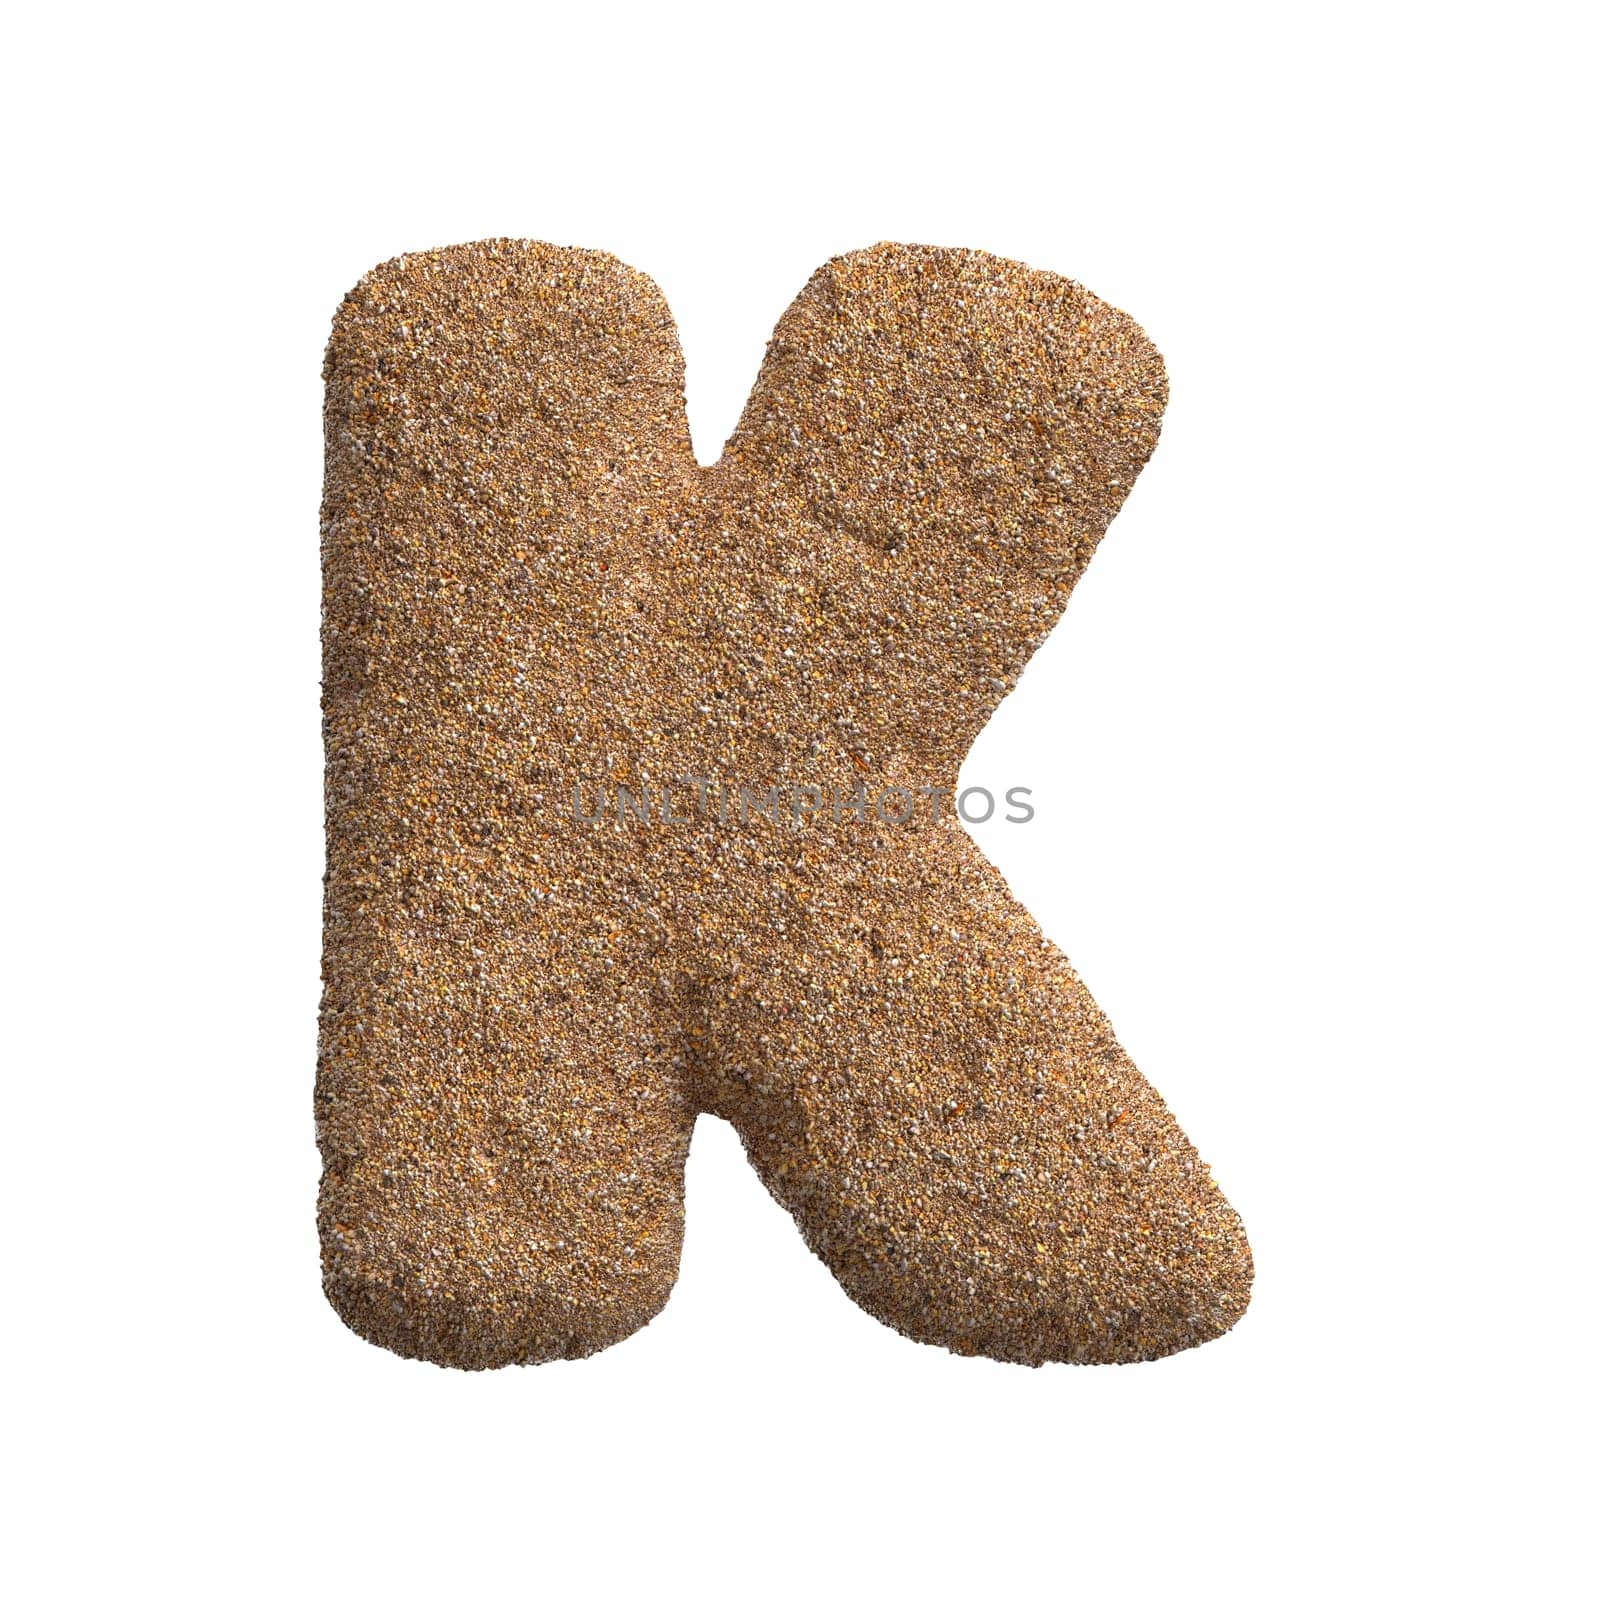 Sand letter K - Capital 3d beach font - Holidays, travel or ocean concepts by chrisroll